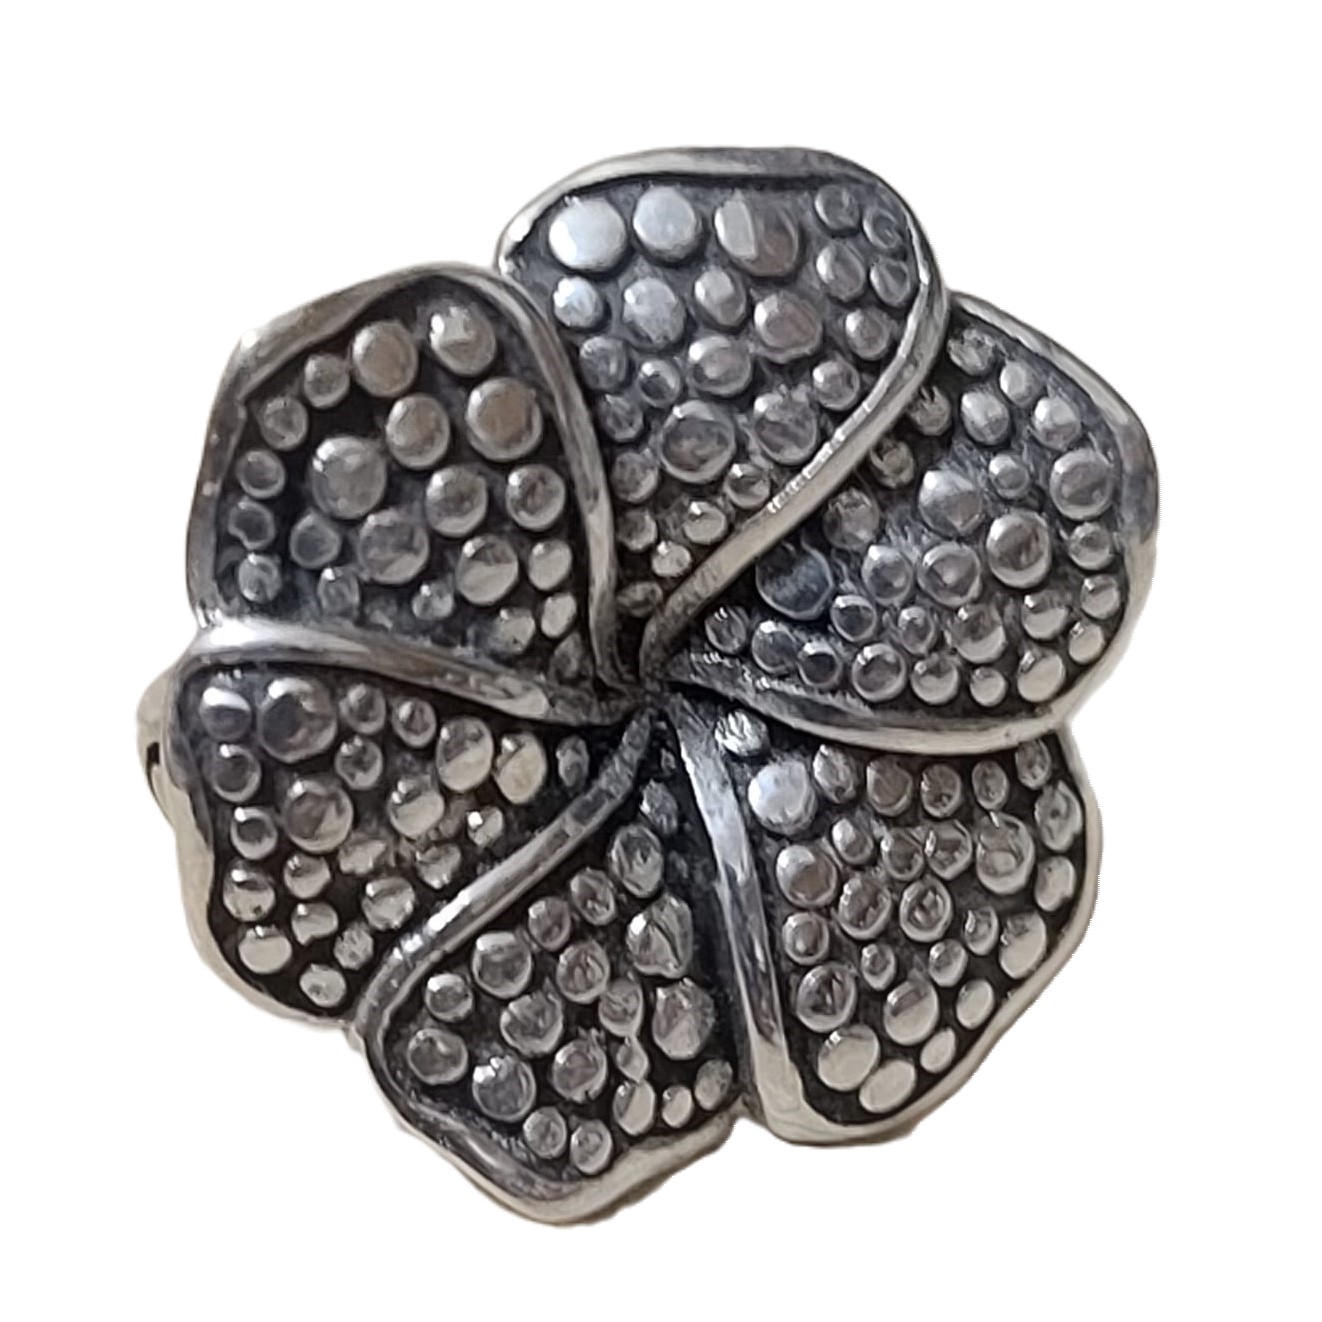 Flower Sterling Silver Ring Size 7